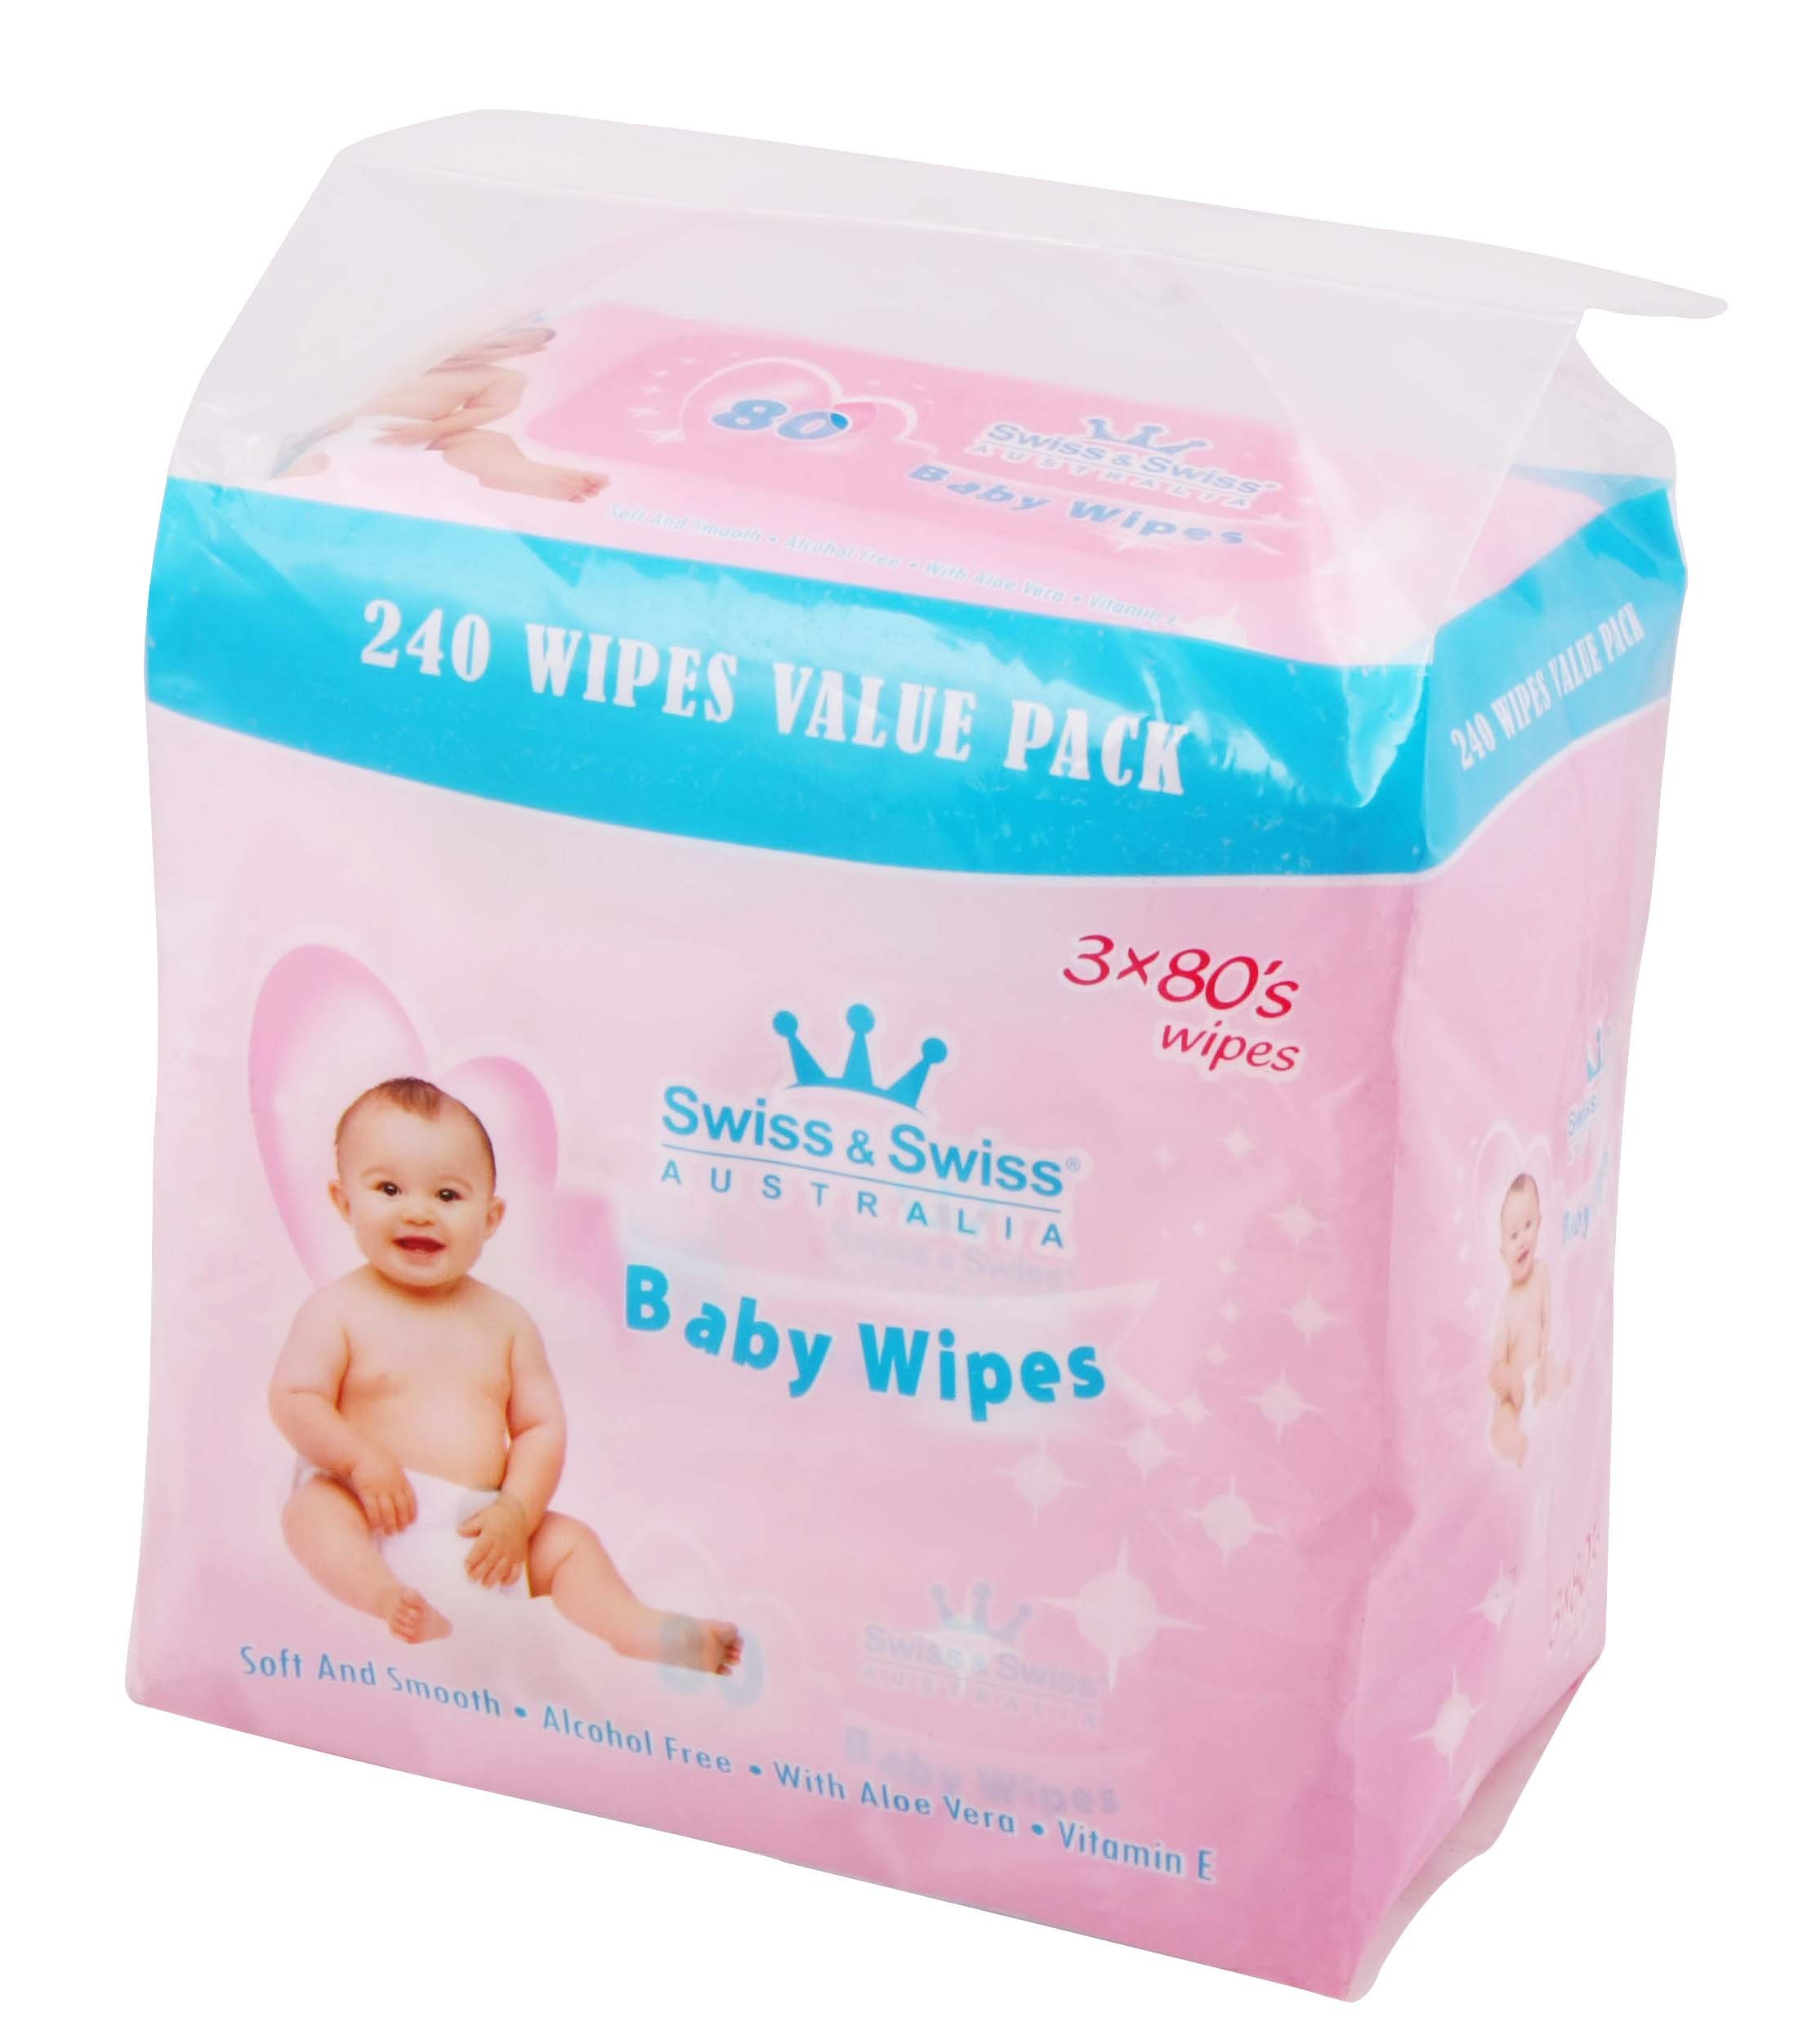 Baby Wet Wipes, Good Helper For Baby Care | Industrial-news